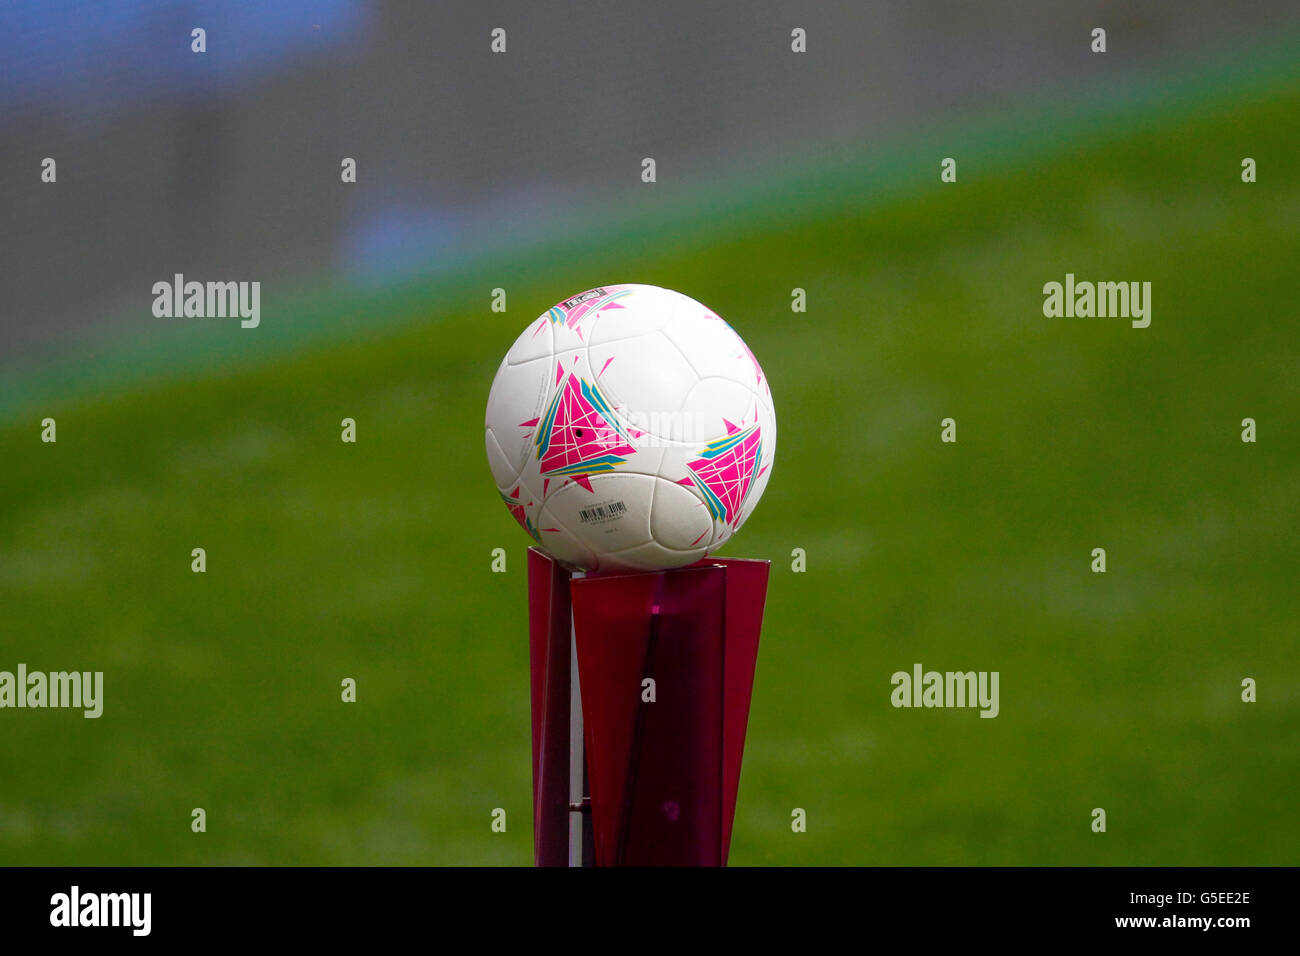 London Olympic Games - Games competitions - MON. The match ball on a stand prior to kick-off Stock Photo